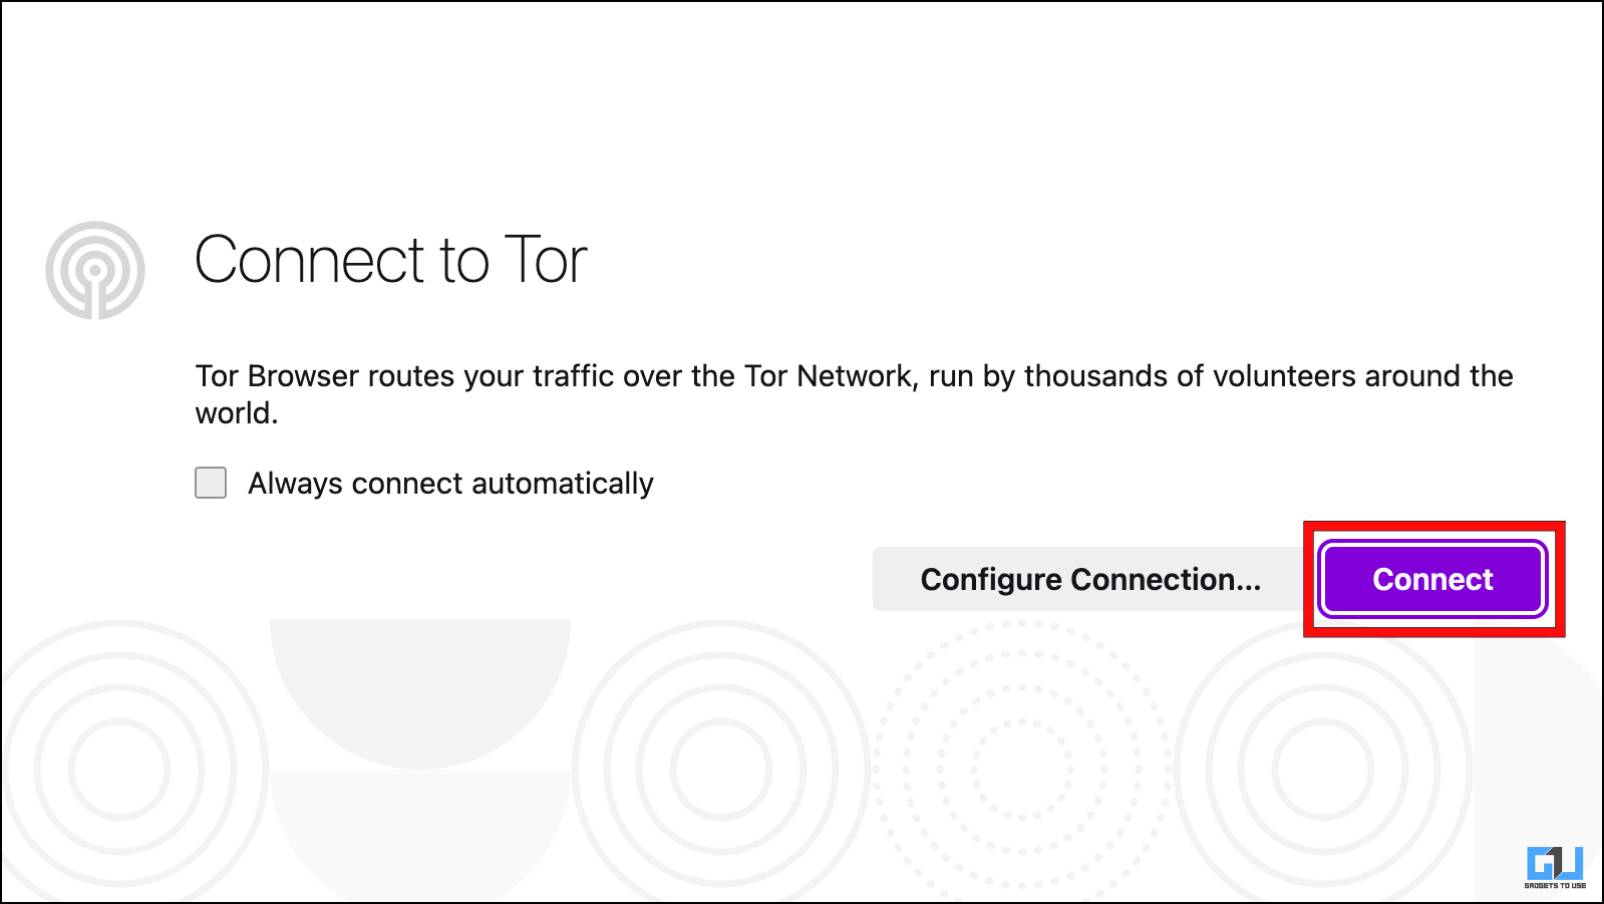 Connecting to the Tor Network